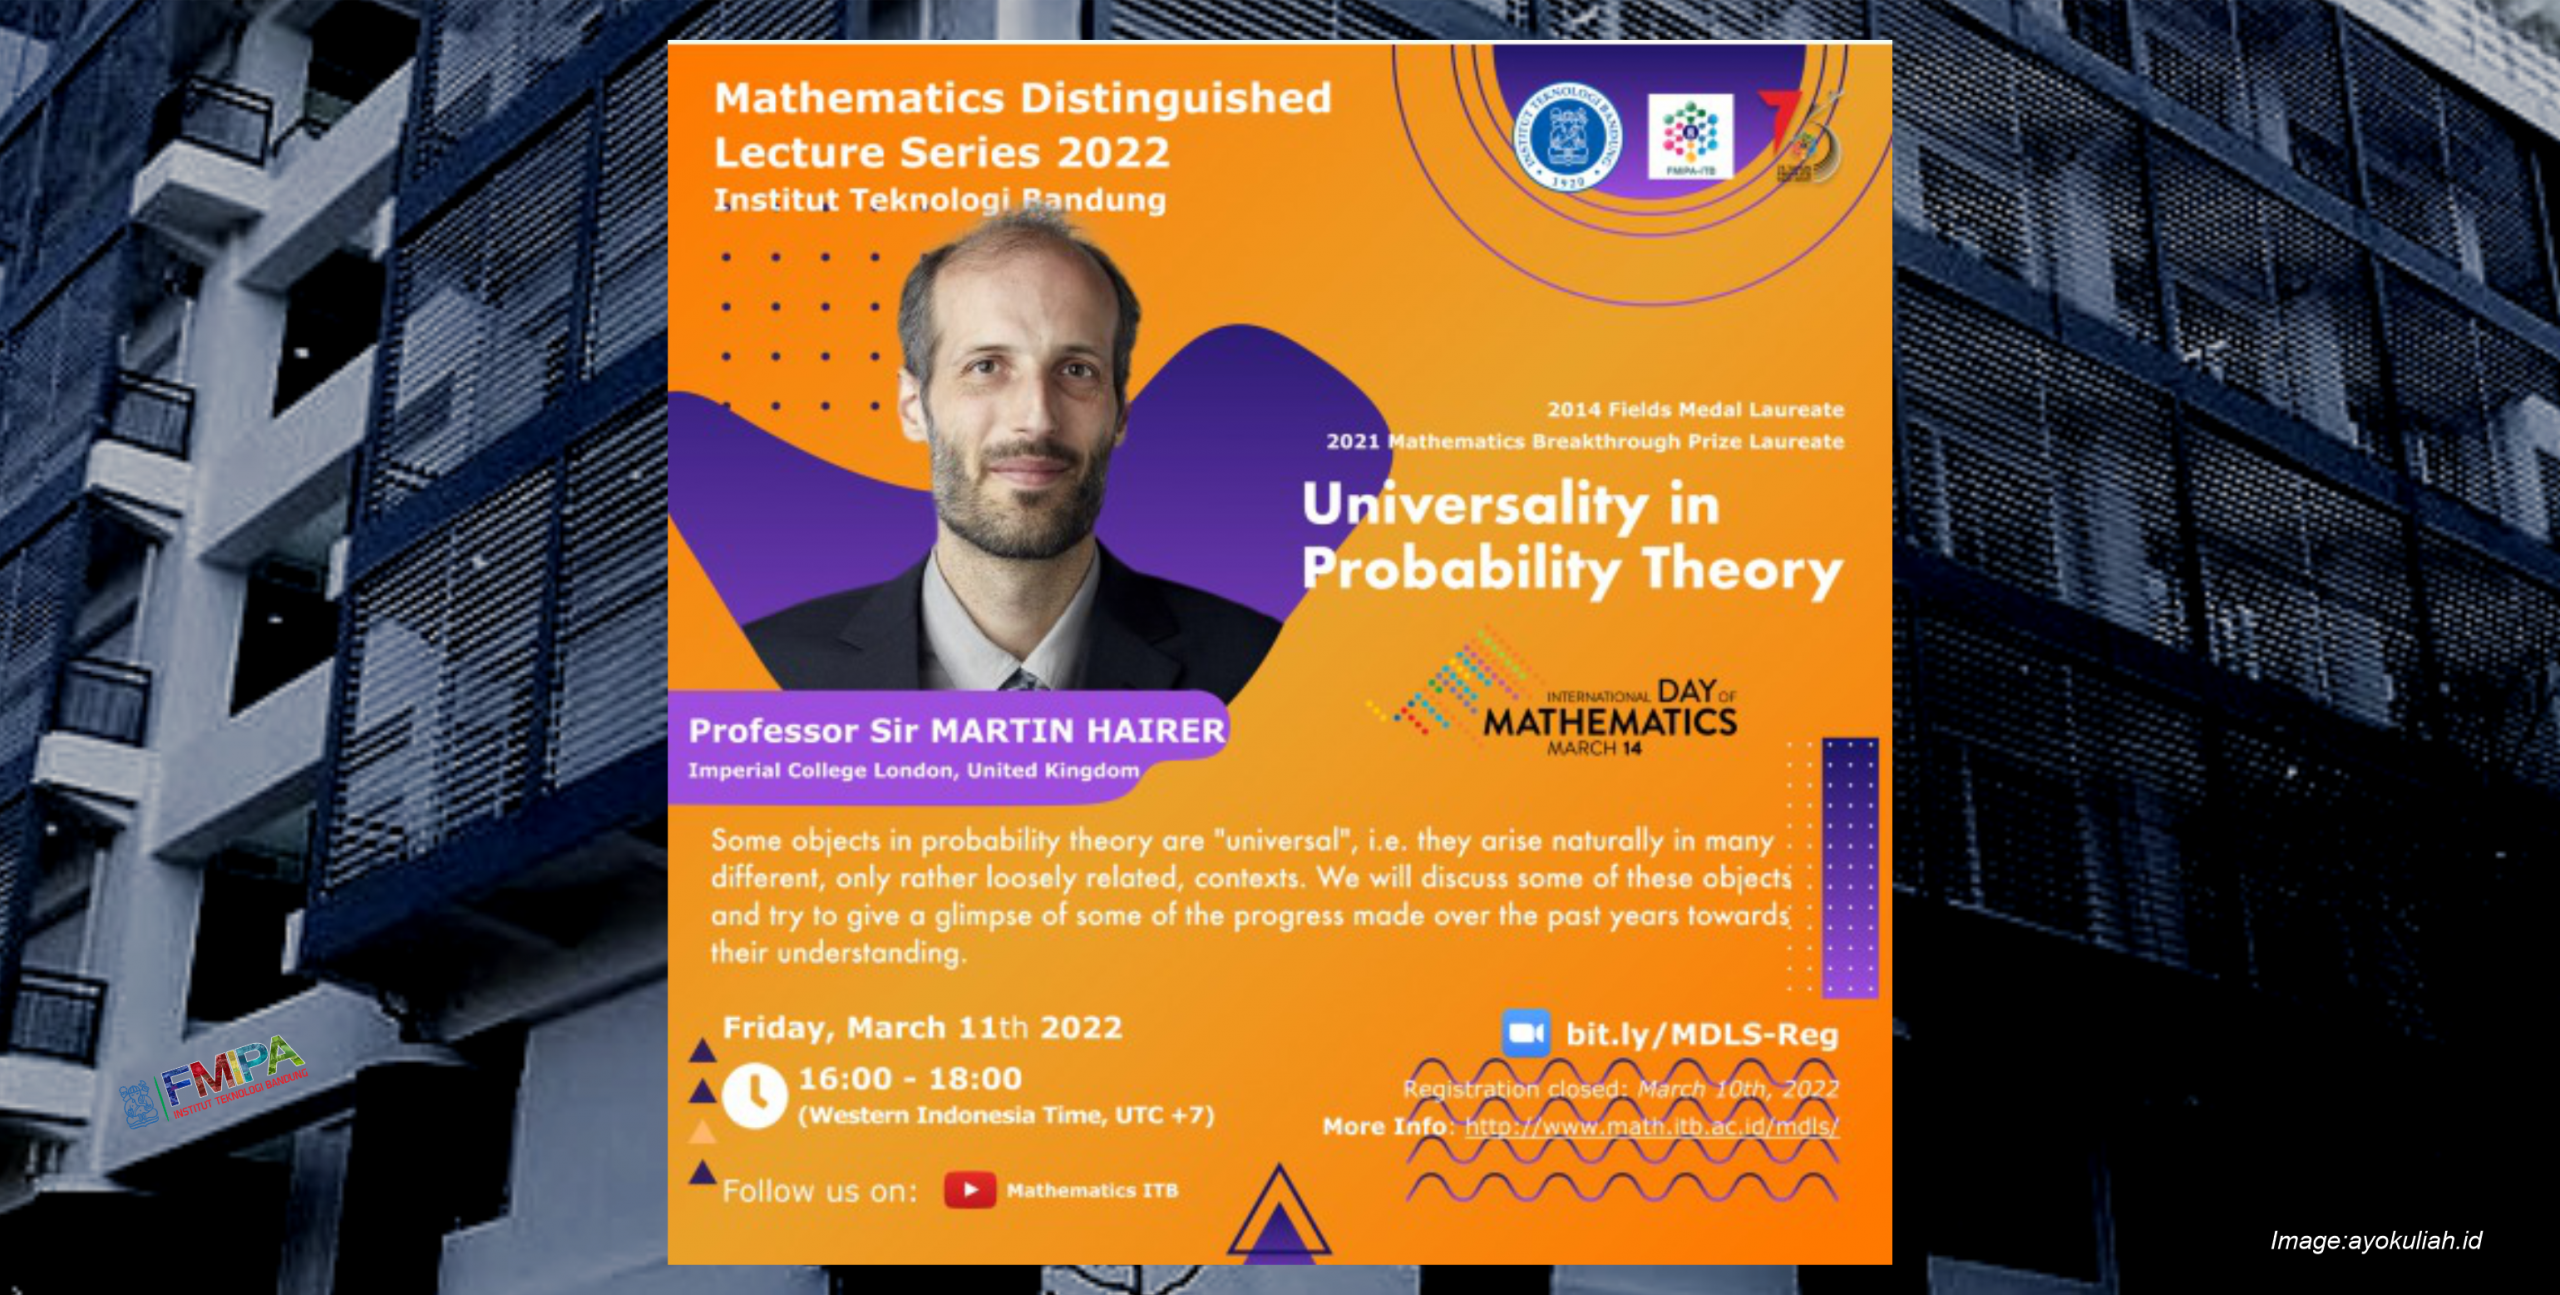 Mathematics Distinguished Lecture Series 2022: “Universality in Probability Theory”, Prof. Sir Martin Hairer from Imperial College London, United Kingdom